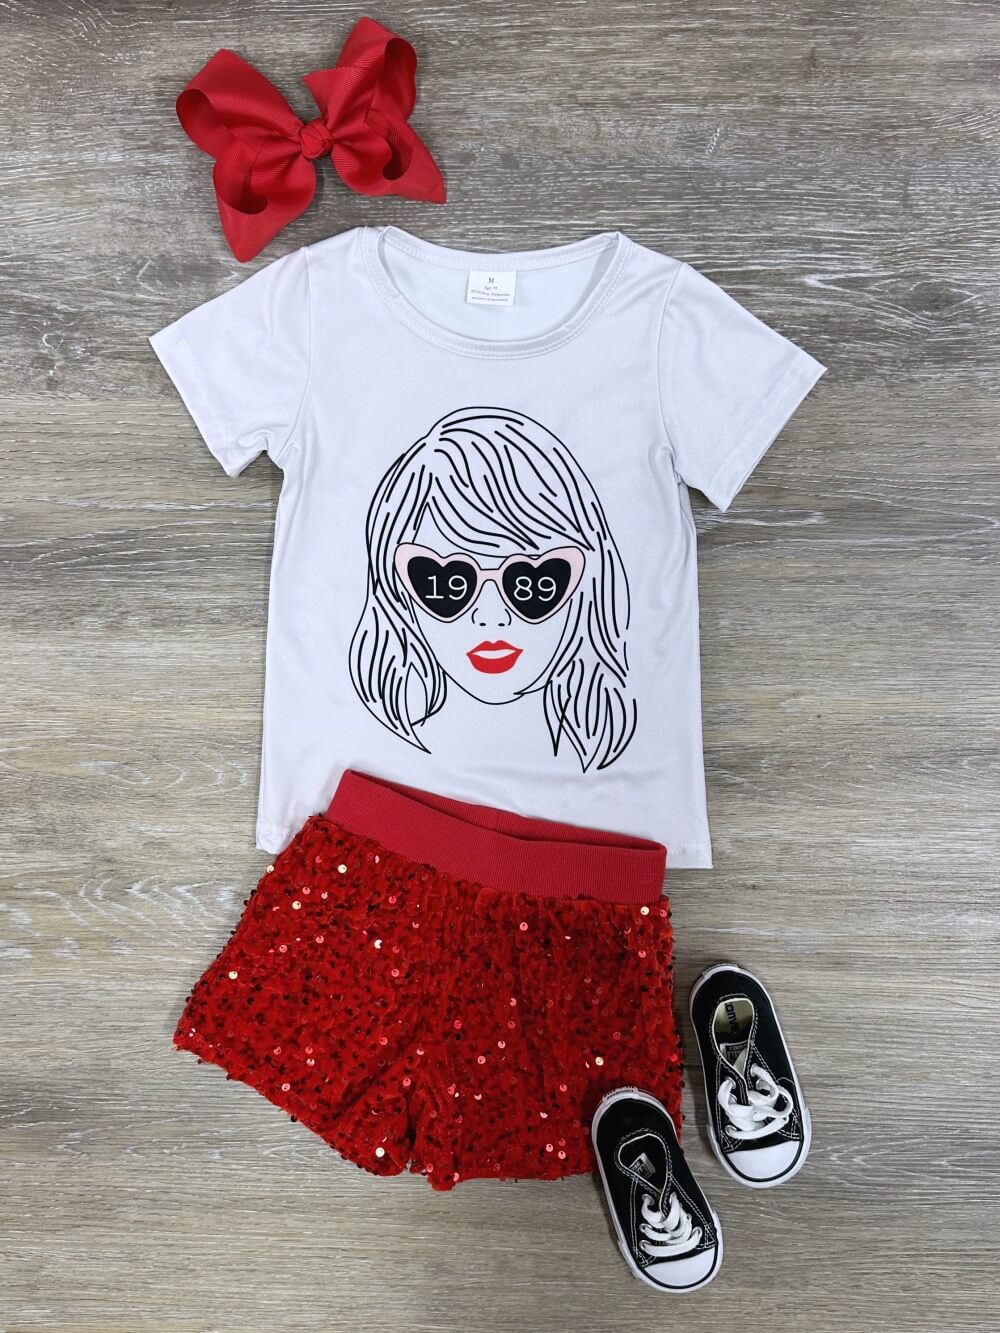 1989 Heart Glasses Red Sequin Girls Shorts Outfit